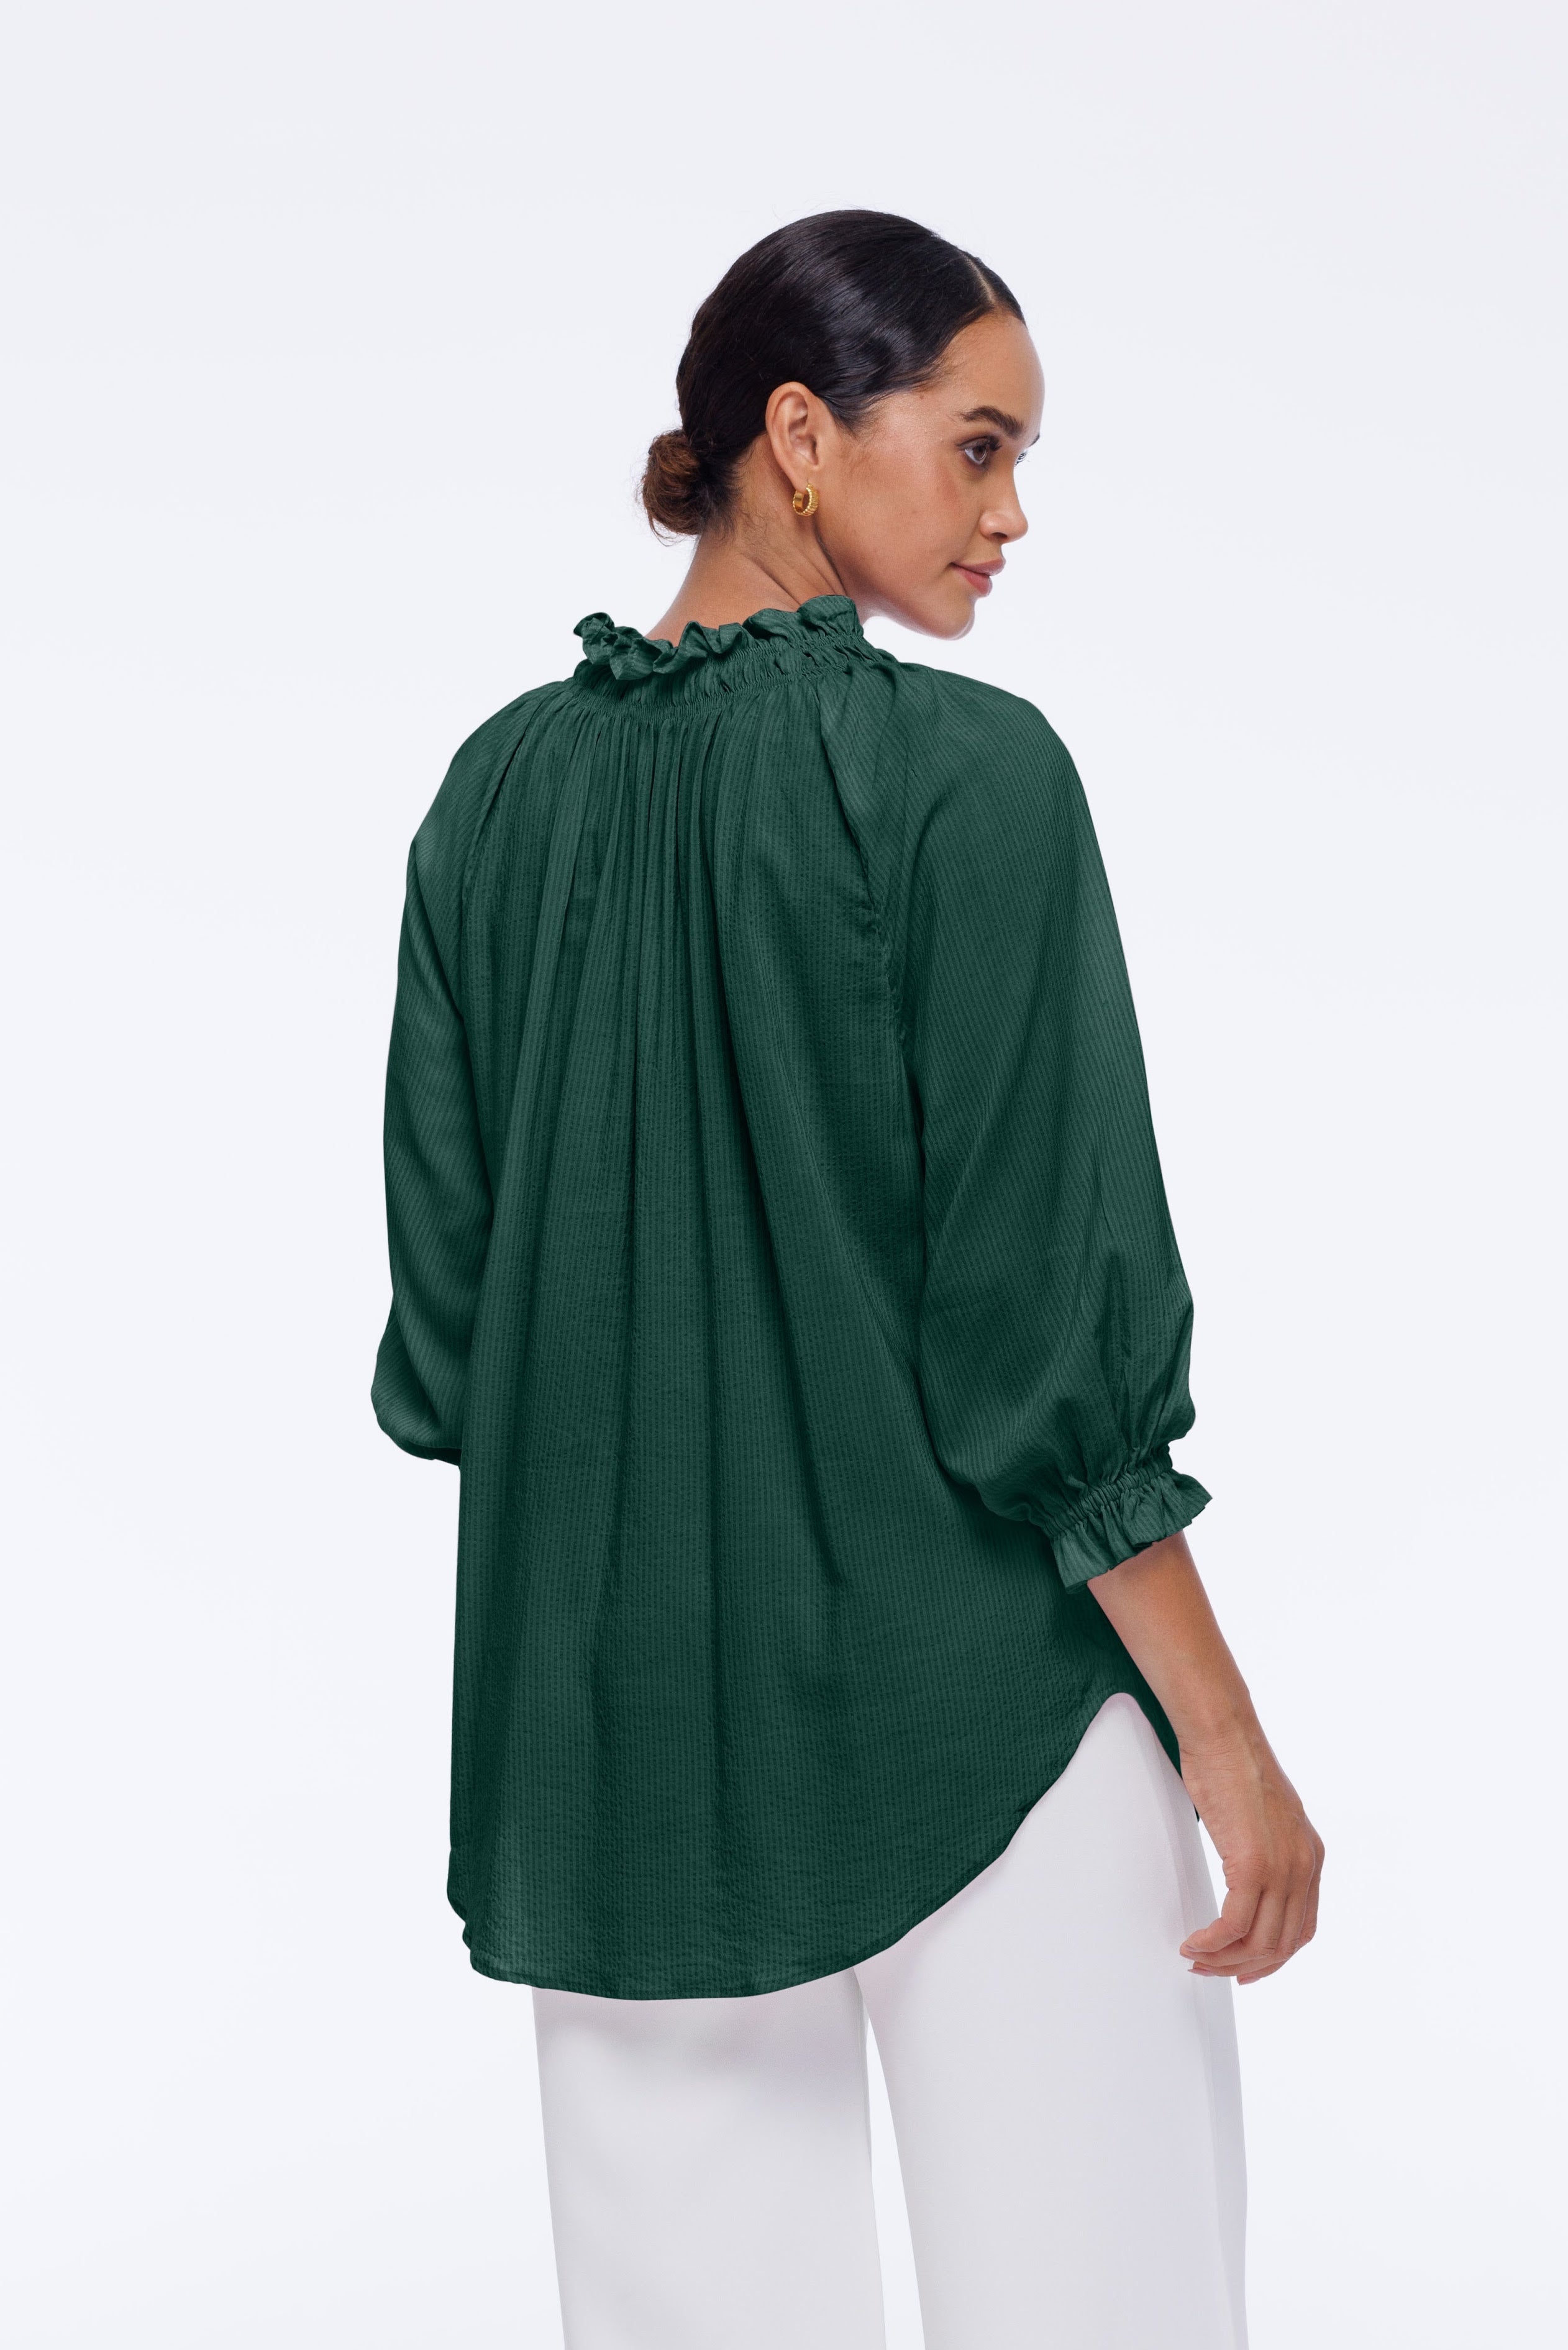 French Kiss Top - Emerald